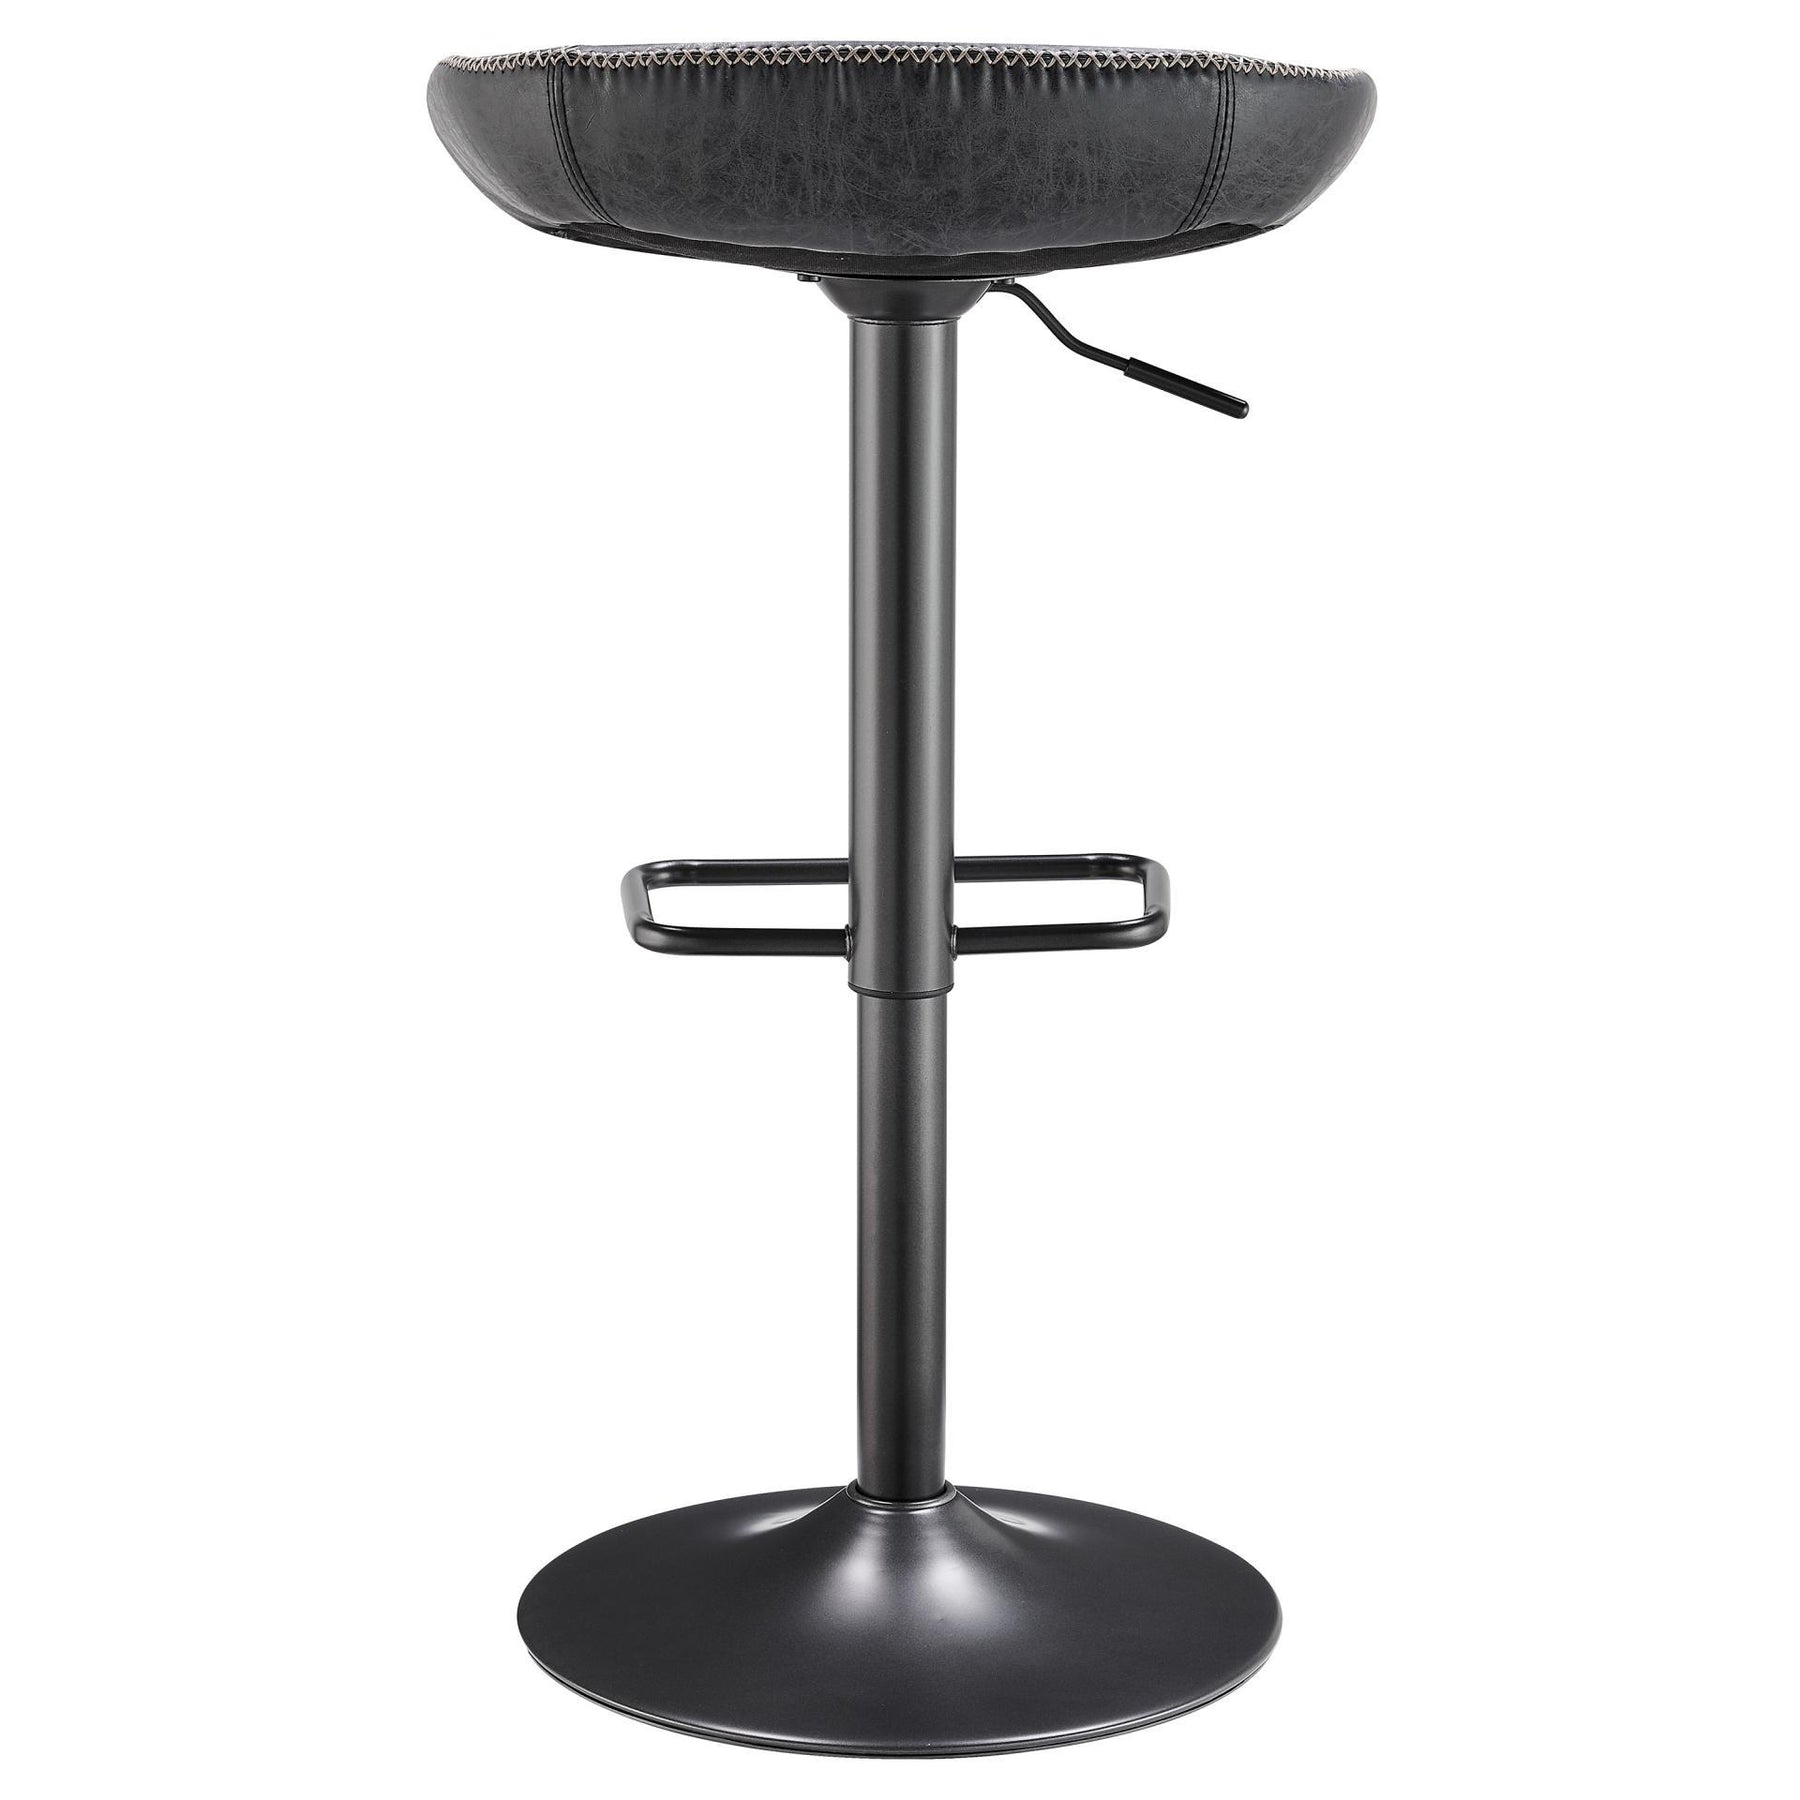 Rogue PU Leather Gaslift Bar Stool (Set of 2) by New Pacific Direct - 9300085